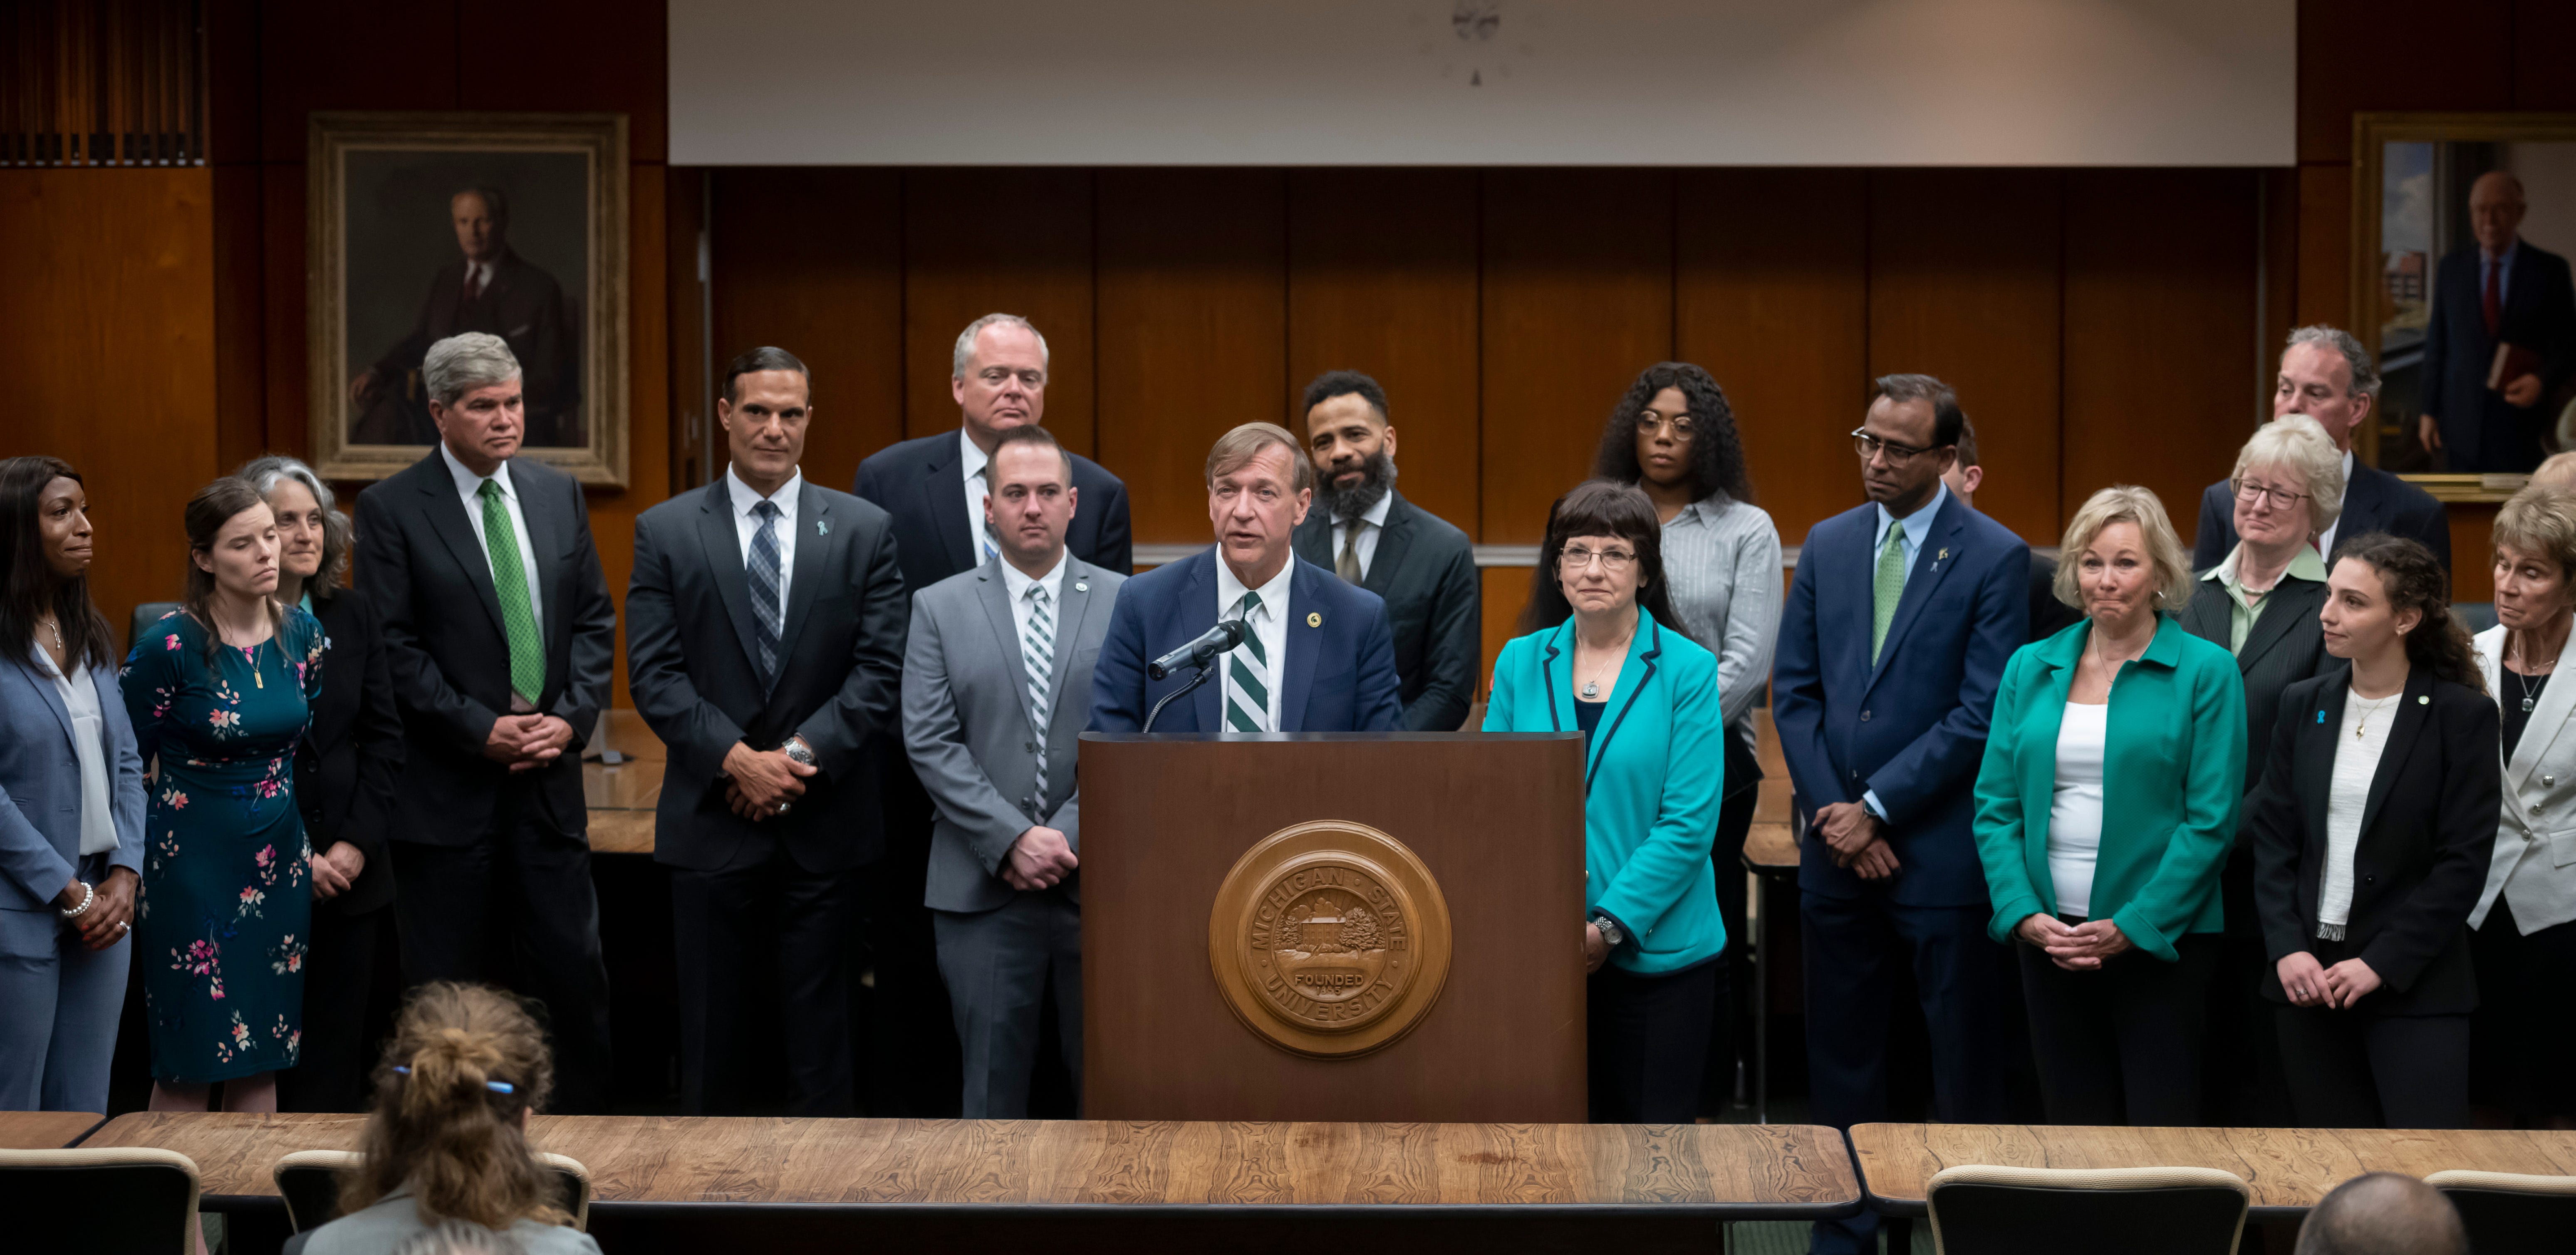 Samuel Stanley Jr., center, surrounded by faculty, trustees and search committee members, participates in a question and answer session after the Michigan State University board of trustees voted to elect him the university's 21st president, May 28, 2019.